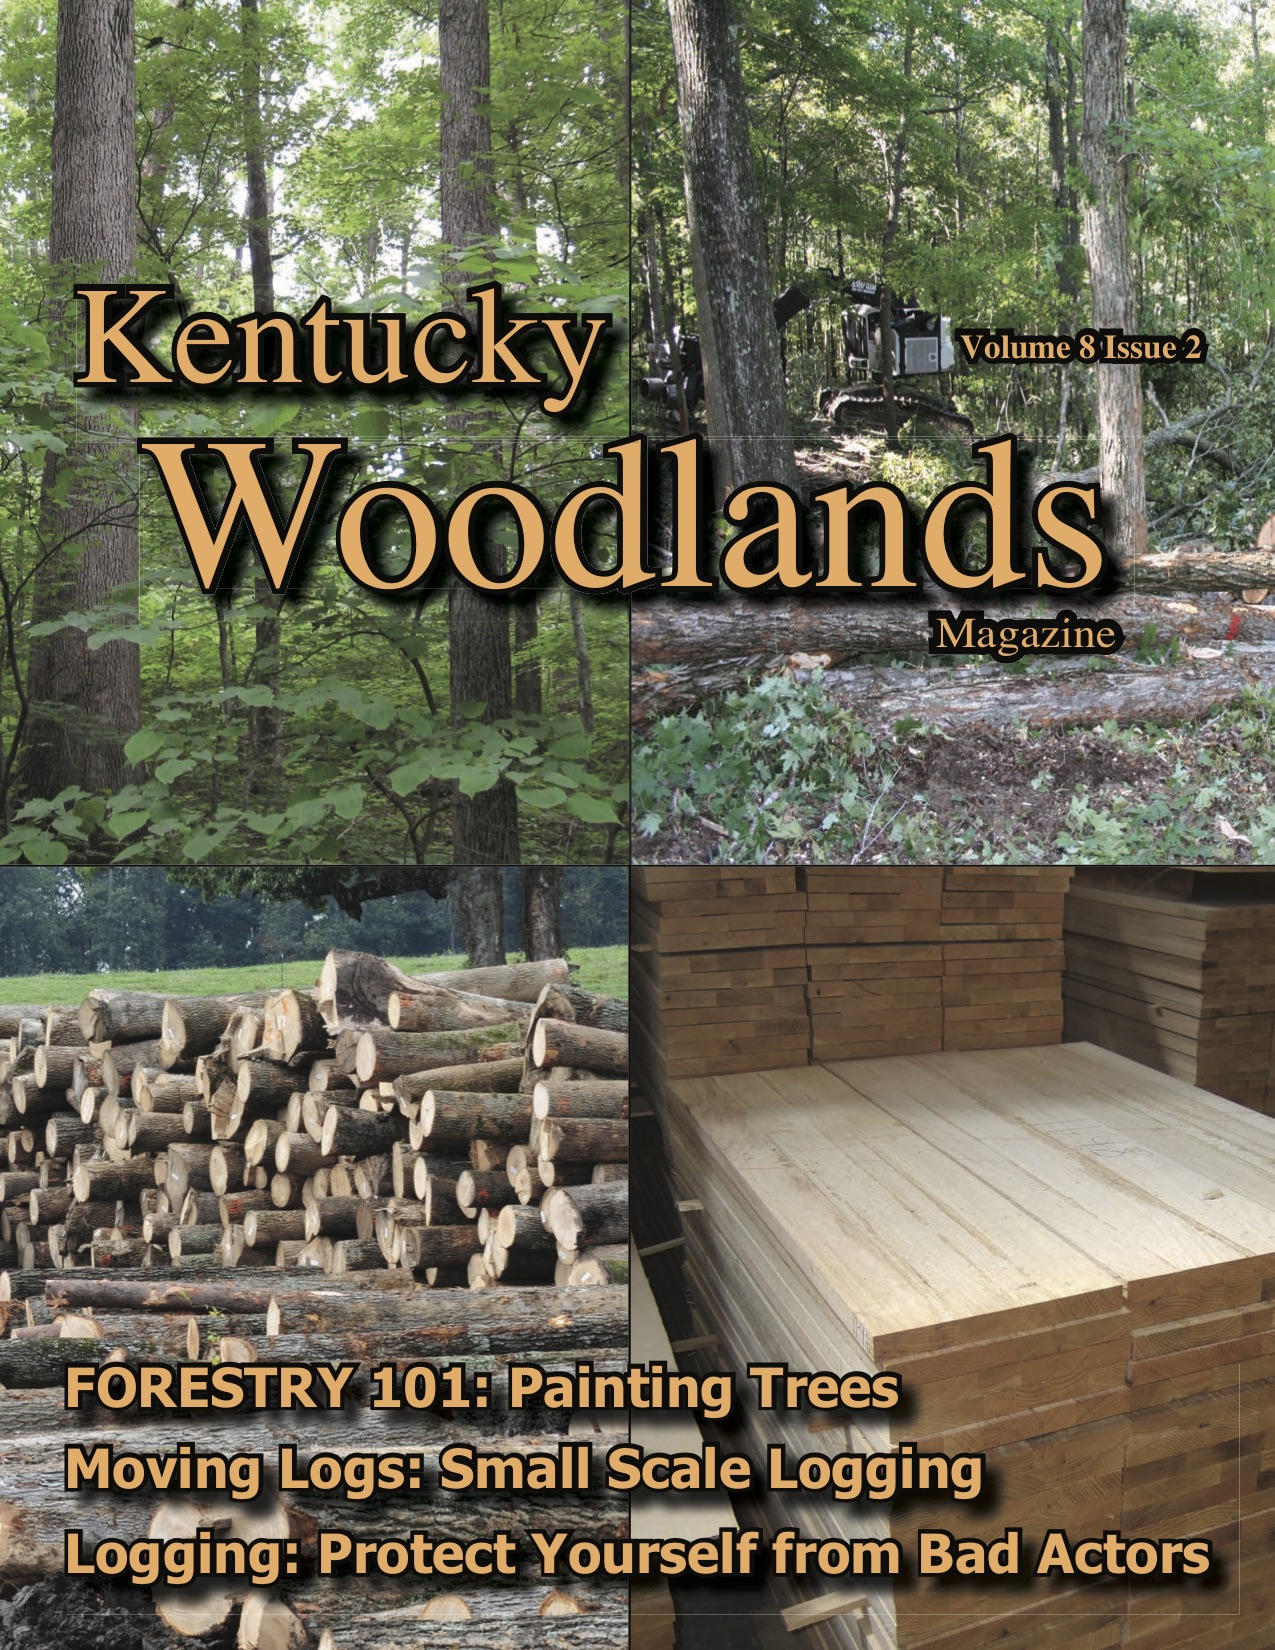 Kentucky Woodlands Magazine Volume 8, Issue 2 Cover